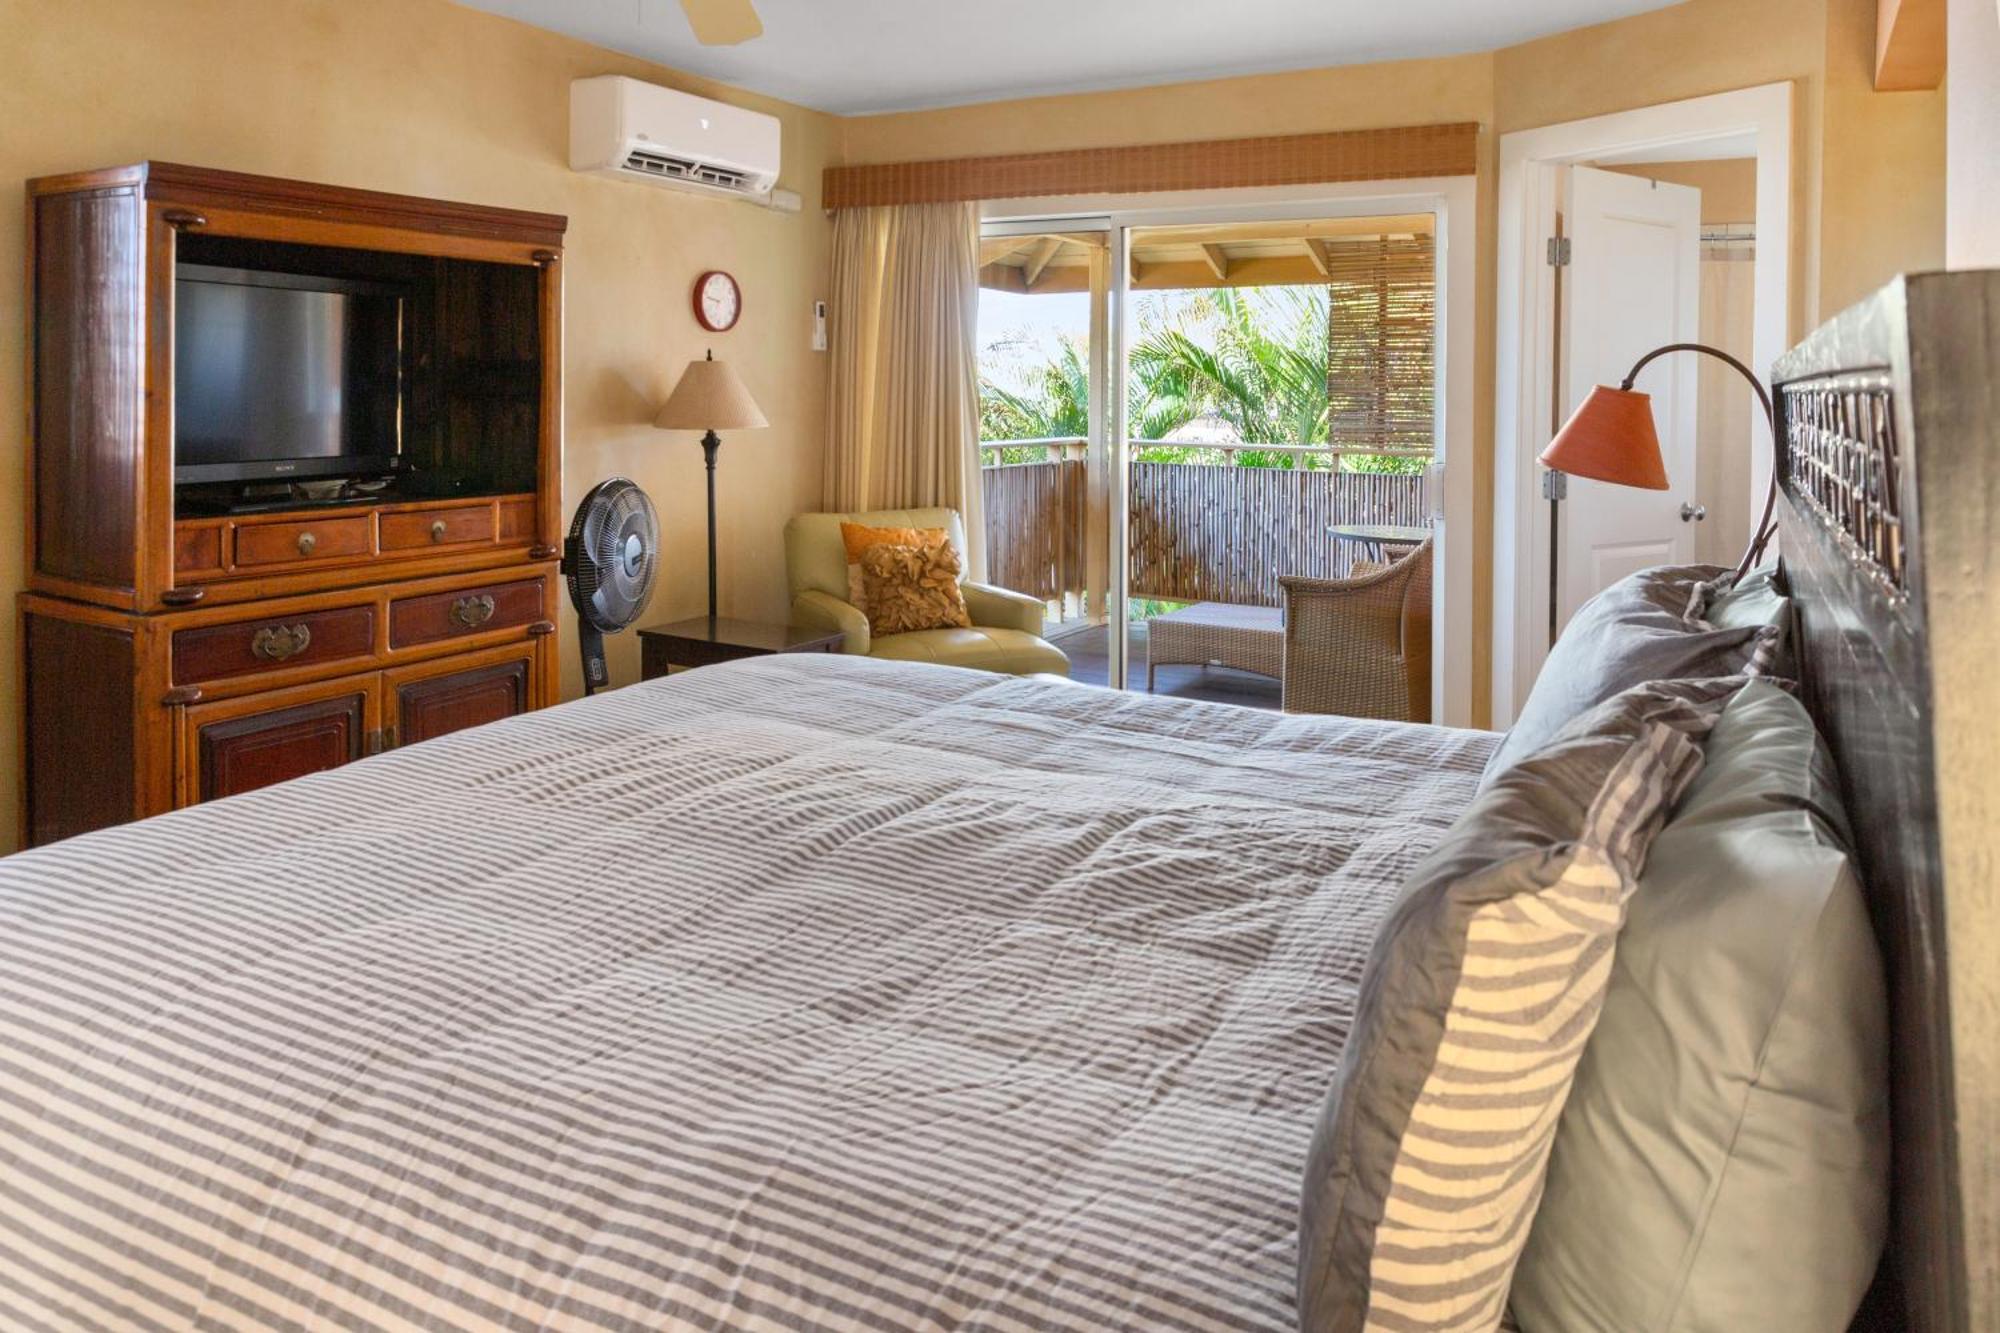 Orchid Suite In South Maui, Across From The Beach, 1 Bedroom Sleeps 4 Kihei Ngoại thất bức ảnh